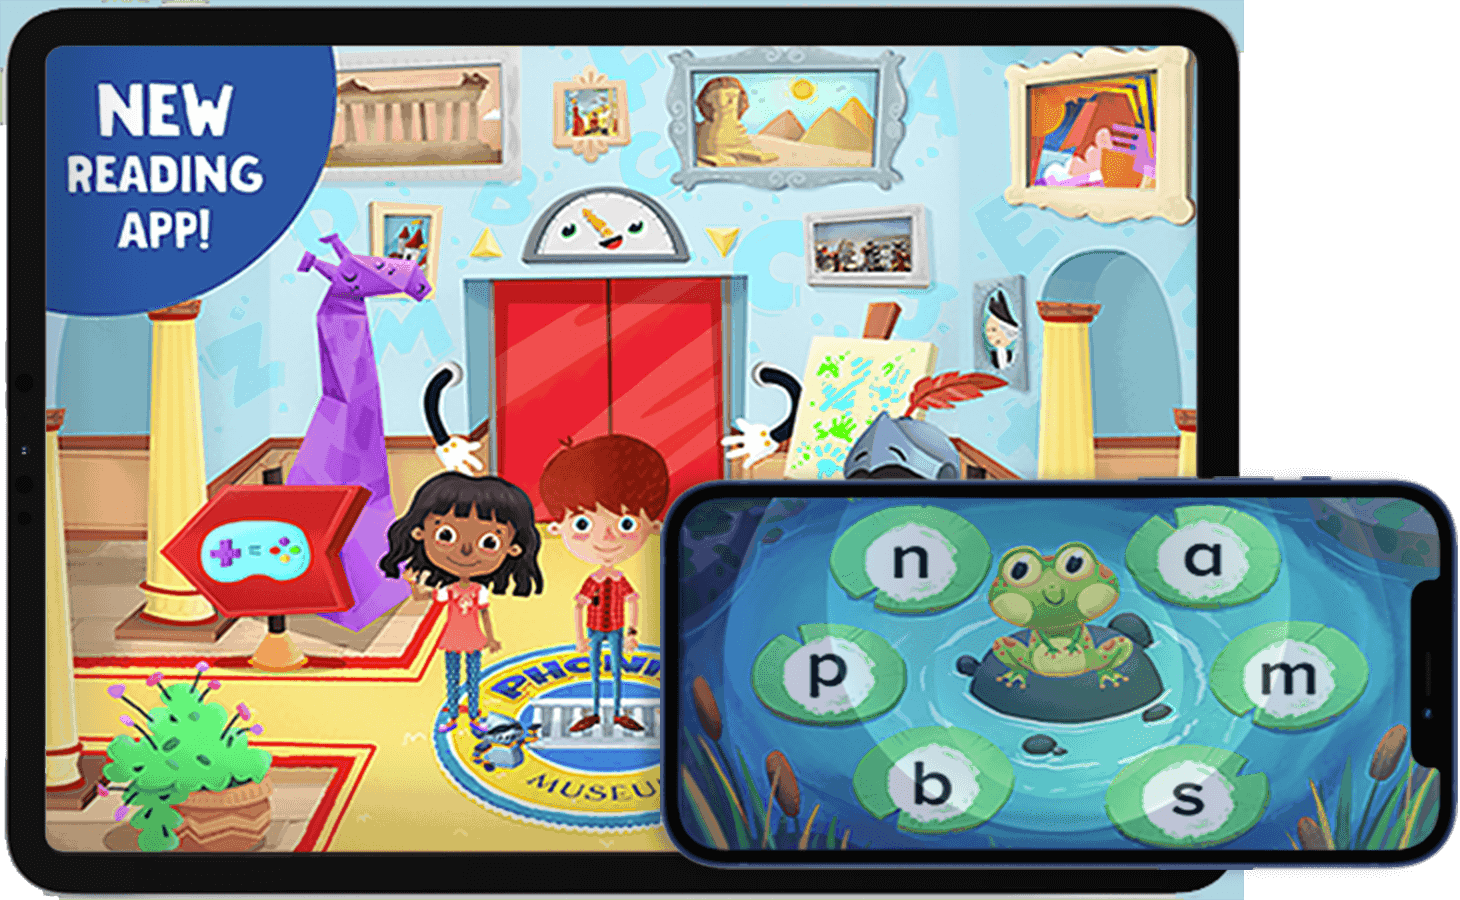 Phonics Museum is a learn to read app we love. It teaches from a classical perspective. If you want a video game curriculum, this is a great pic.